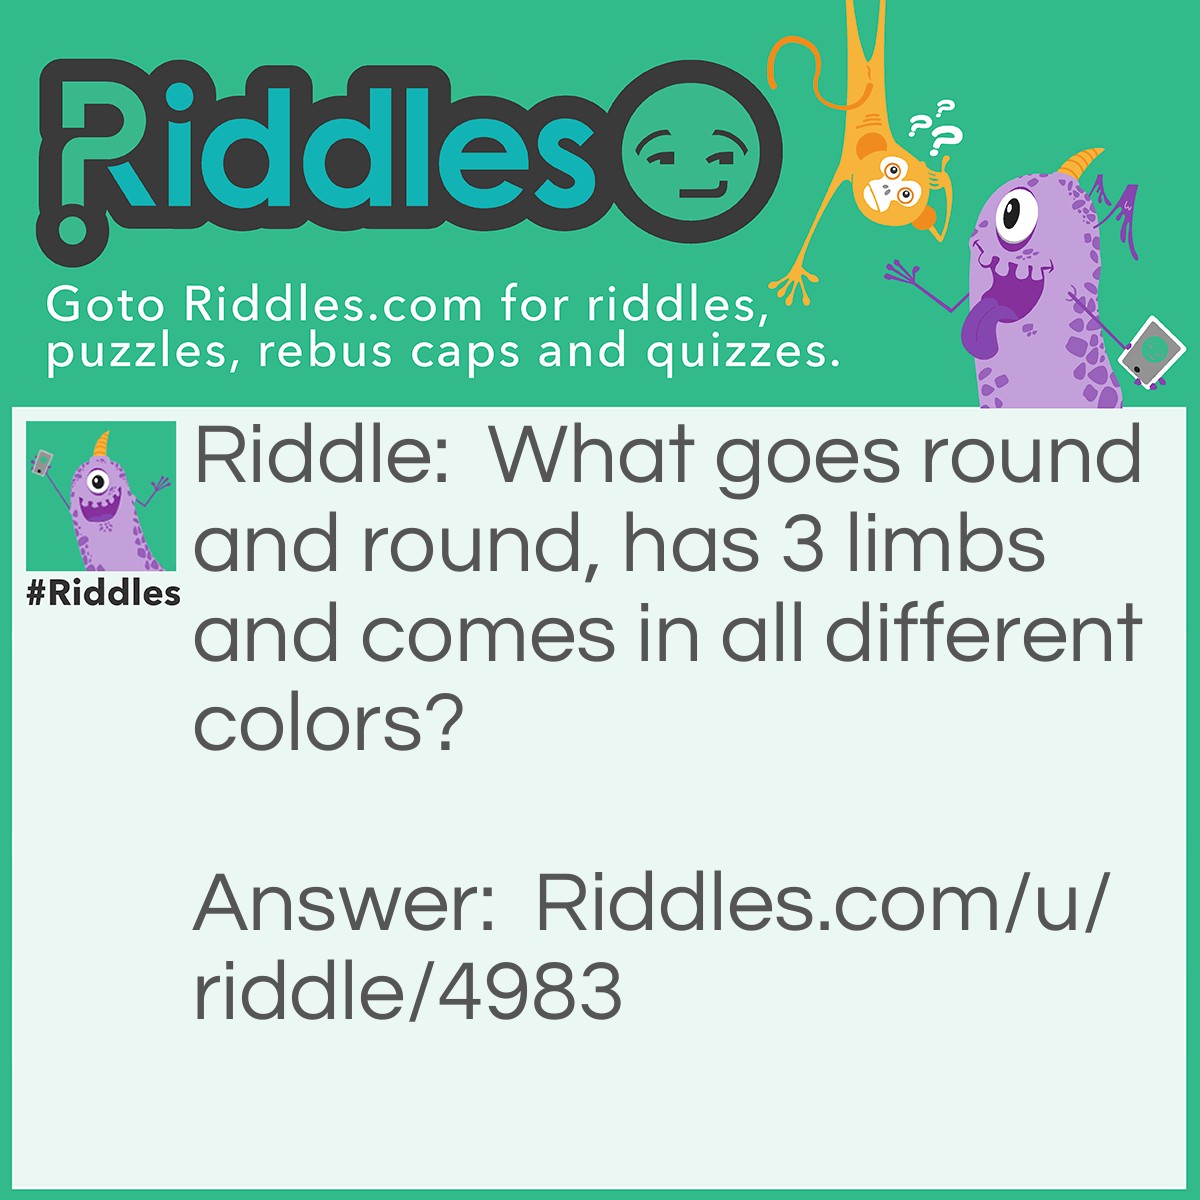 Riddle: What goes round and round, has 3 limbs and comes in all different colors? Answer: Fidget Spinner!